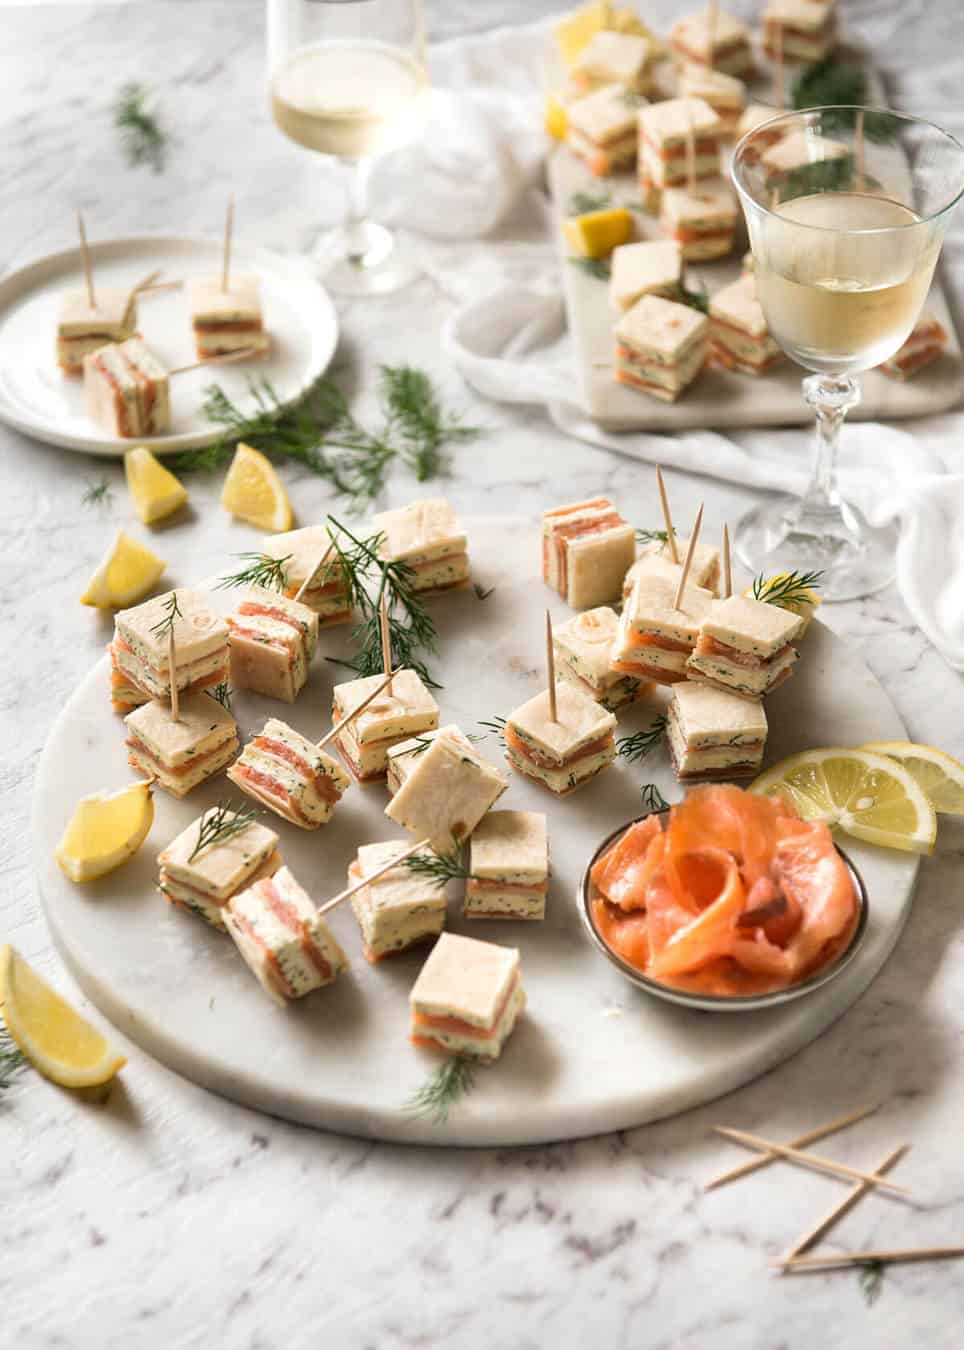 Smoked Salmon Appetizer fantastic for gatherings - no fiddly assembly, served at room temperature, looks elegant and tastes SO GOOD!